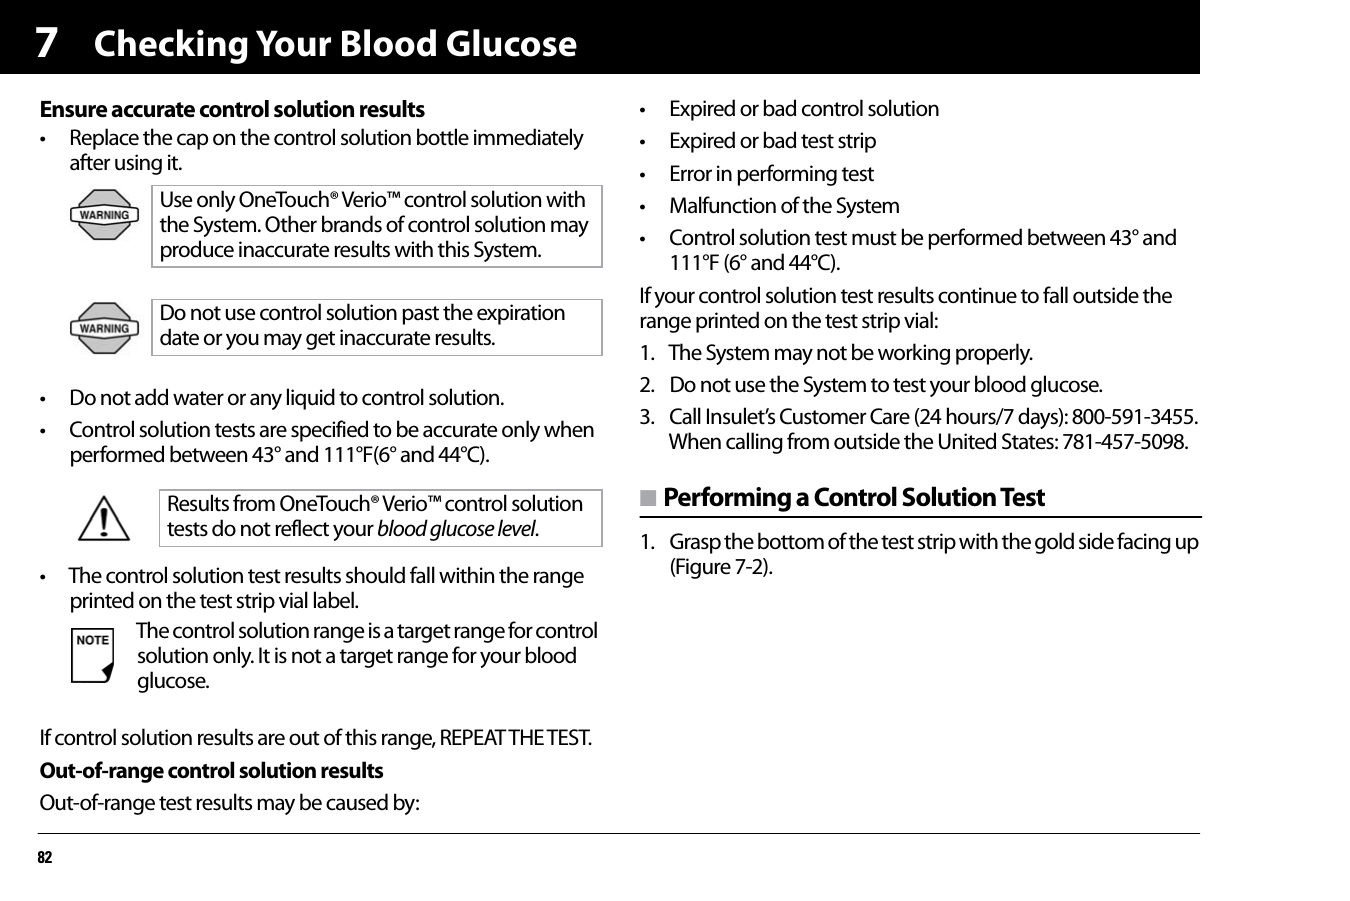 Checking Your Blood Glucose827Ensure accurate control solution results• Replace the cap on the control solution bottle immediately after using it.• Do not add water or any liquid to control solution.• Control solution tests are specified to be accurate only when performed between 43° and 111°F(6° and 44°C).• The control solution test results should fall within the range printed on the test strip vial label.If control solution results are out of this range, REPEAT THE TEST. Out-of-range control solution resultsOut-of-range test results may be caused by:• Expired or bad control solution• Expired or bad test strip• Error in performing test• Malfunction of the System• Control solution test must be performed between 43° and 111°F (6° and 44°C).If your control solution test results continue to fall outside the range printed on the test strip vial:1. The System may not be working properly.2. Do not use the System to test your blood glucose.3. Call Insulet’s Customer Care (24 hours/7 days): 800-591-3455.When calling from outside the United States: 781-457-5098.n Performing a Control Solution Test1. Grasp the bottom of the test strip with the gold side facing up (Figure 7-2).Use only OneTouch® Verio™ control solution with the System. Other brands of control solution may produce inaccurate results with this System.Do not use control solution past the expiration date or you may get inaccurate results.Results from OneTouch® Verio™ control solution tests do not reflect your blood glucose level.The control solution range is a target range for control solution only. It is not a target range for your blood glucose.